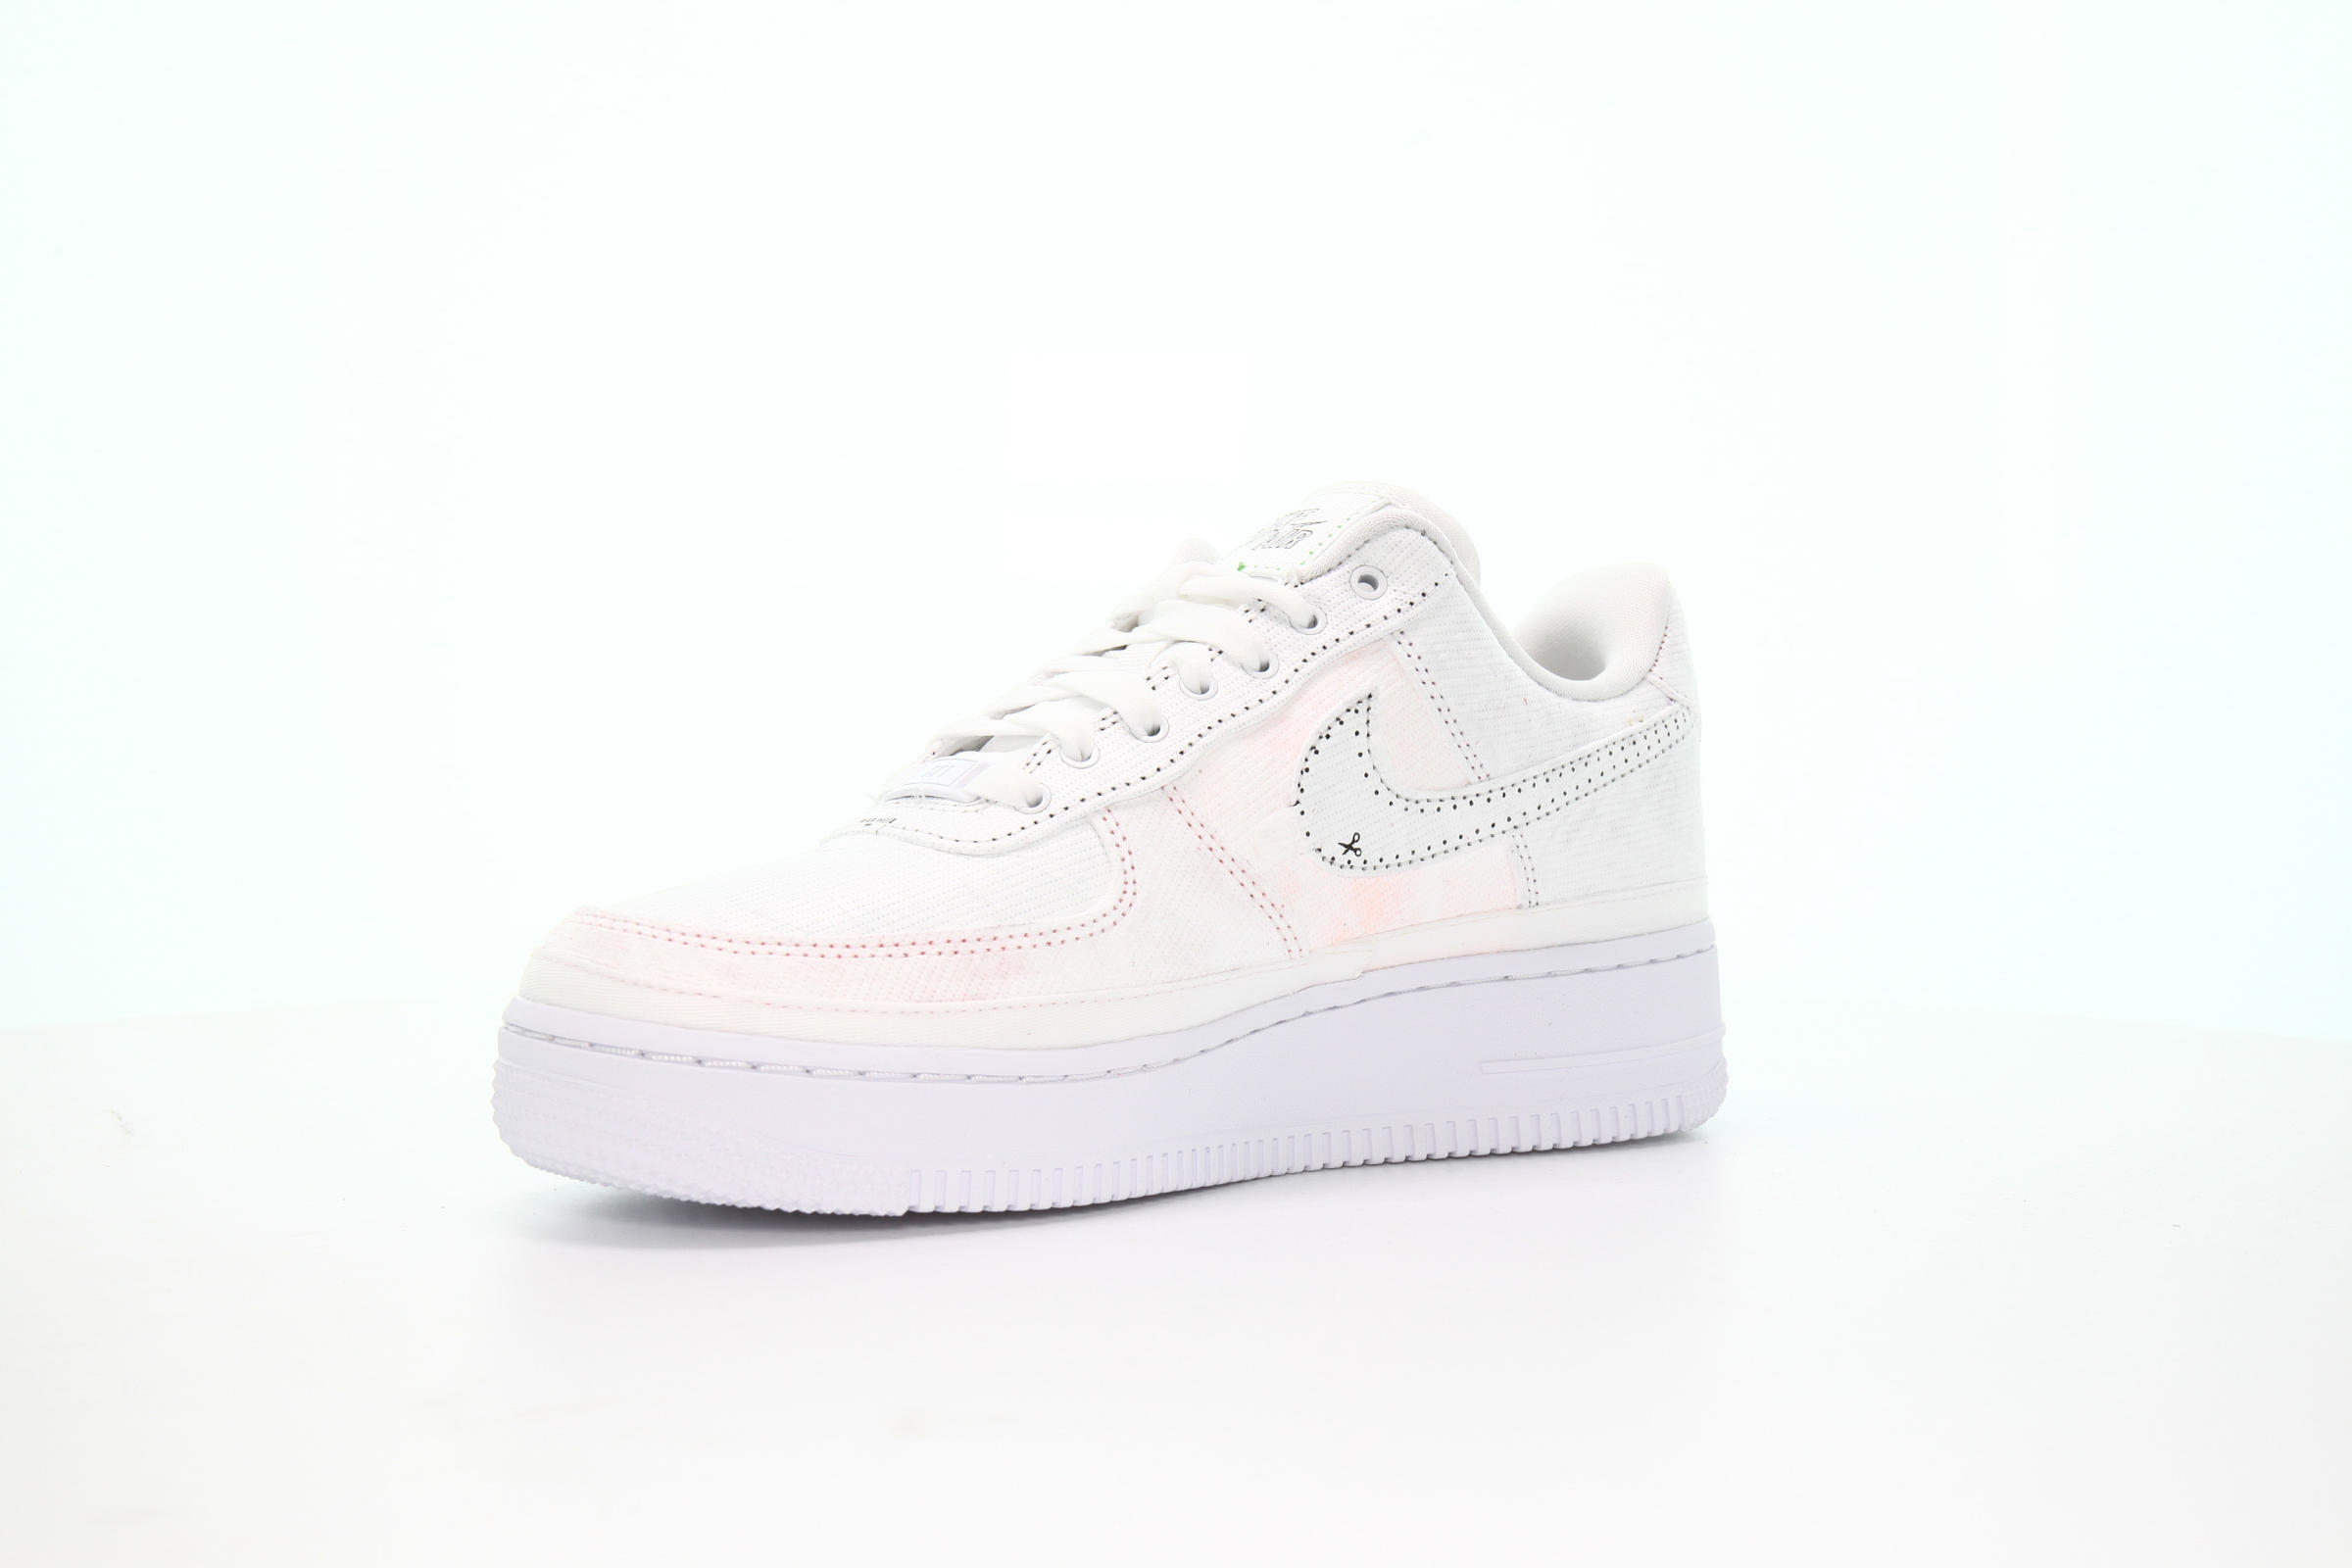 Nike WMNS AIR FORCE 1 '07 LX TEARAWAY "RED SWOOSH"